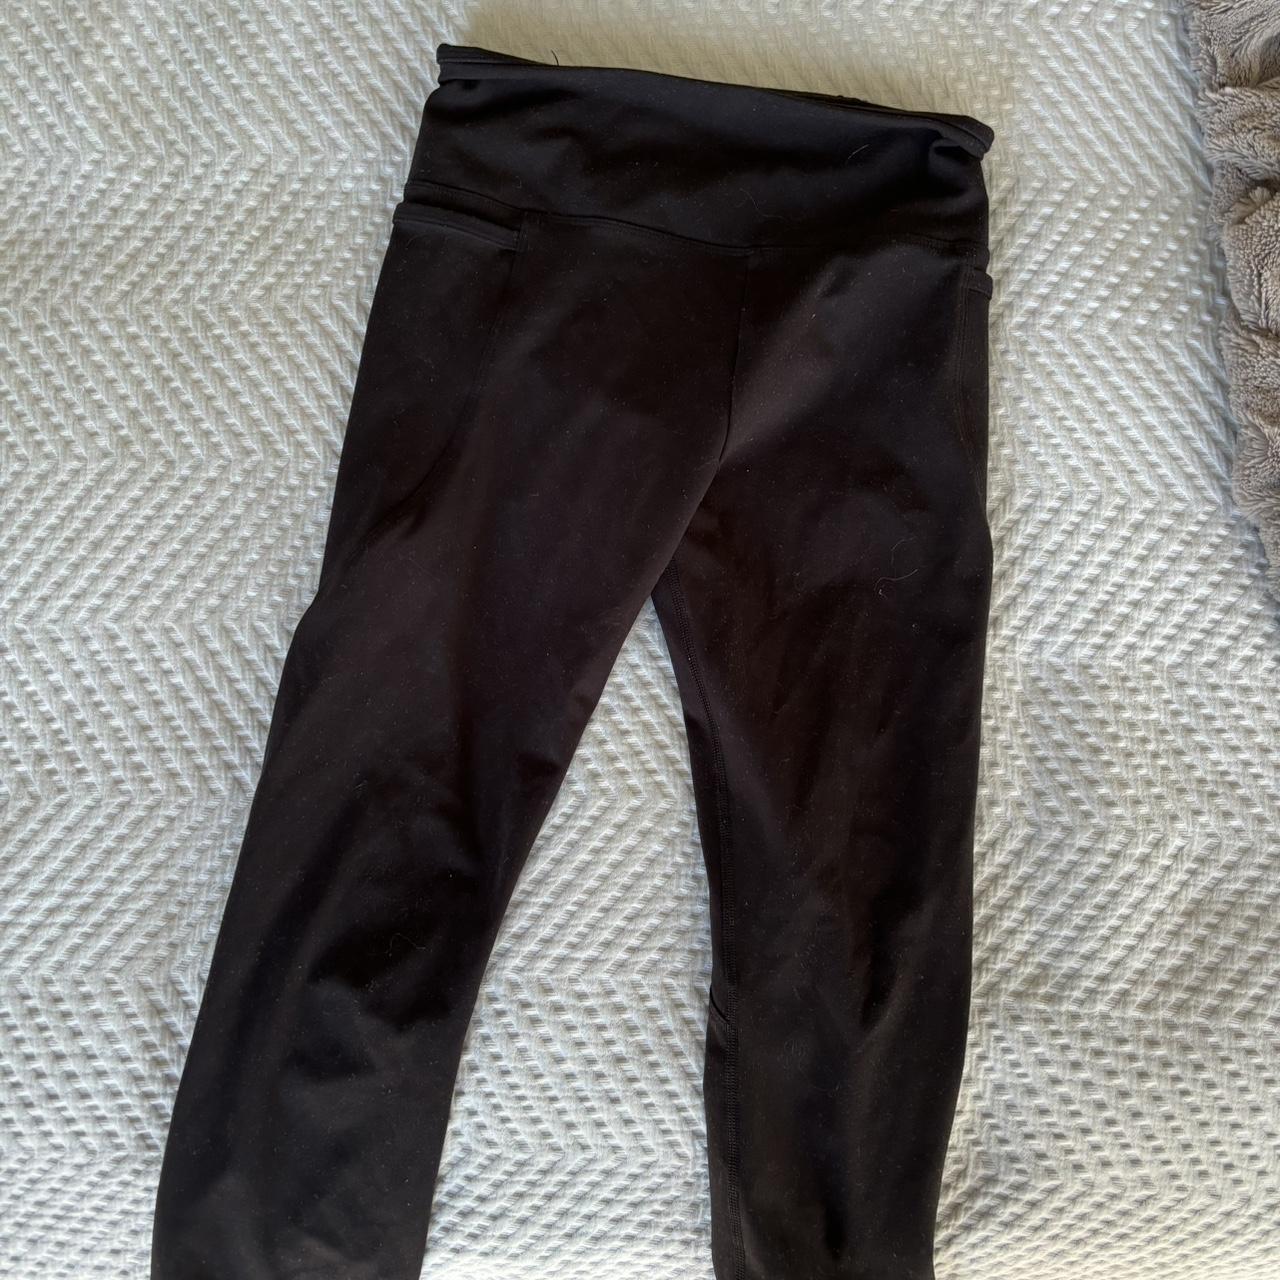 Lorna Jane tights Worn a few times - great condition - Depop